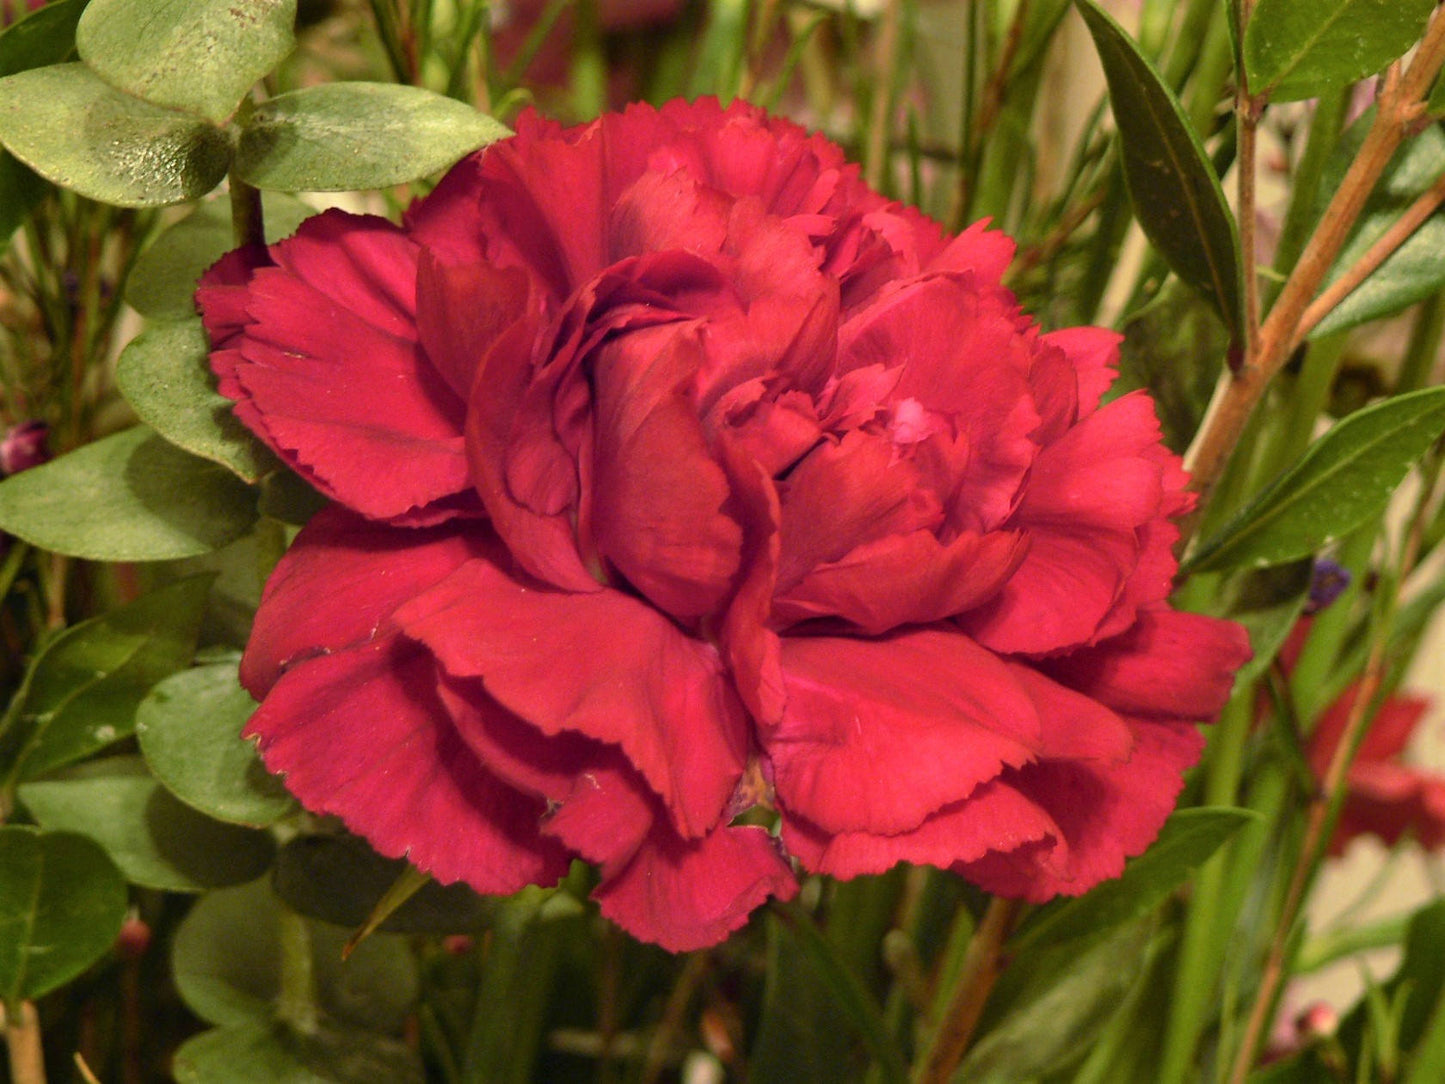 100 Mixed CARNATION / DOUBLE DIANTHUS Chinensis Flower Seeds